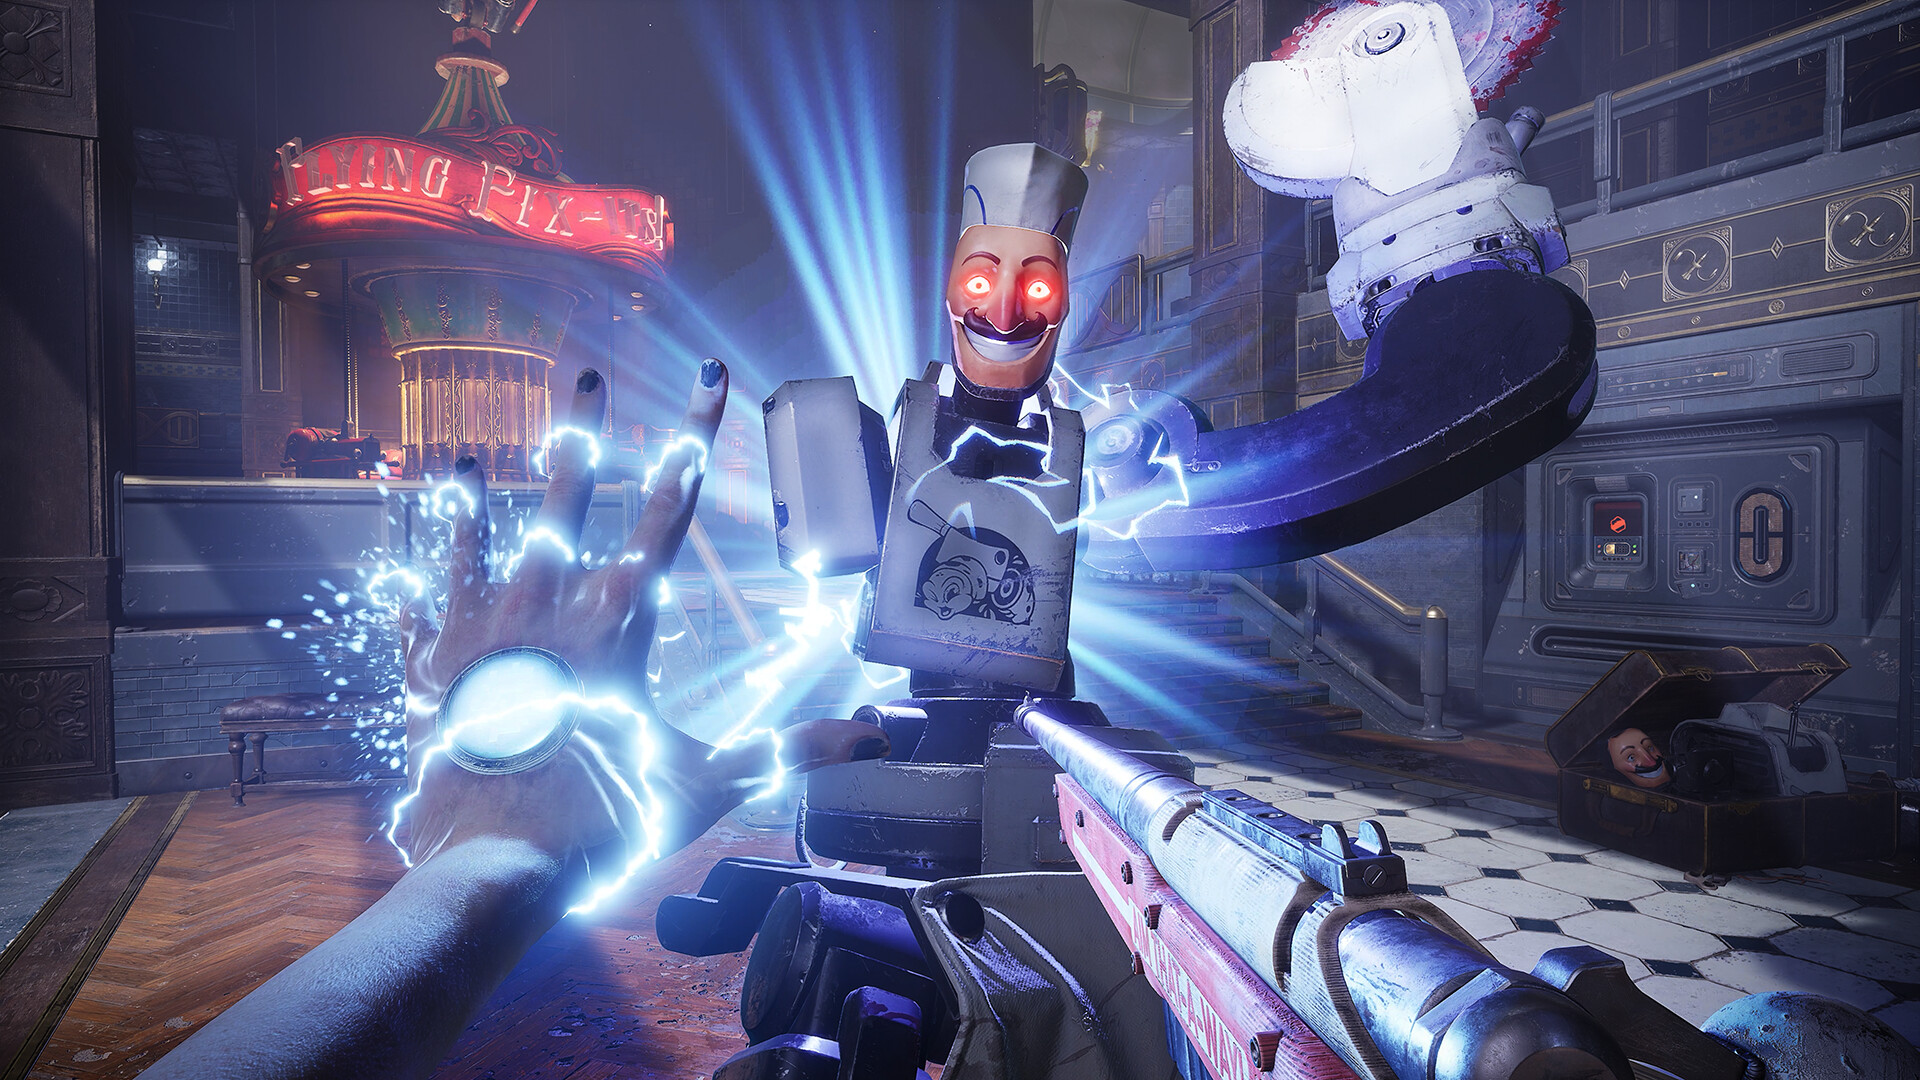 A screenshot from the video game Judas: a robot with glowing red eyes, being attached by a player with blue electricity coming from their left hand and a shotgun in their right hand